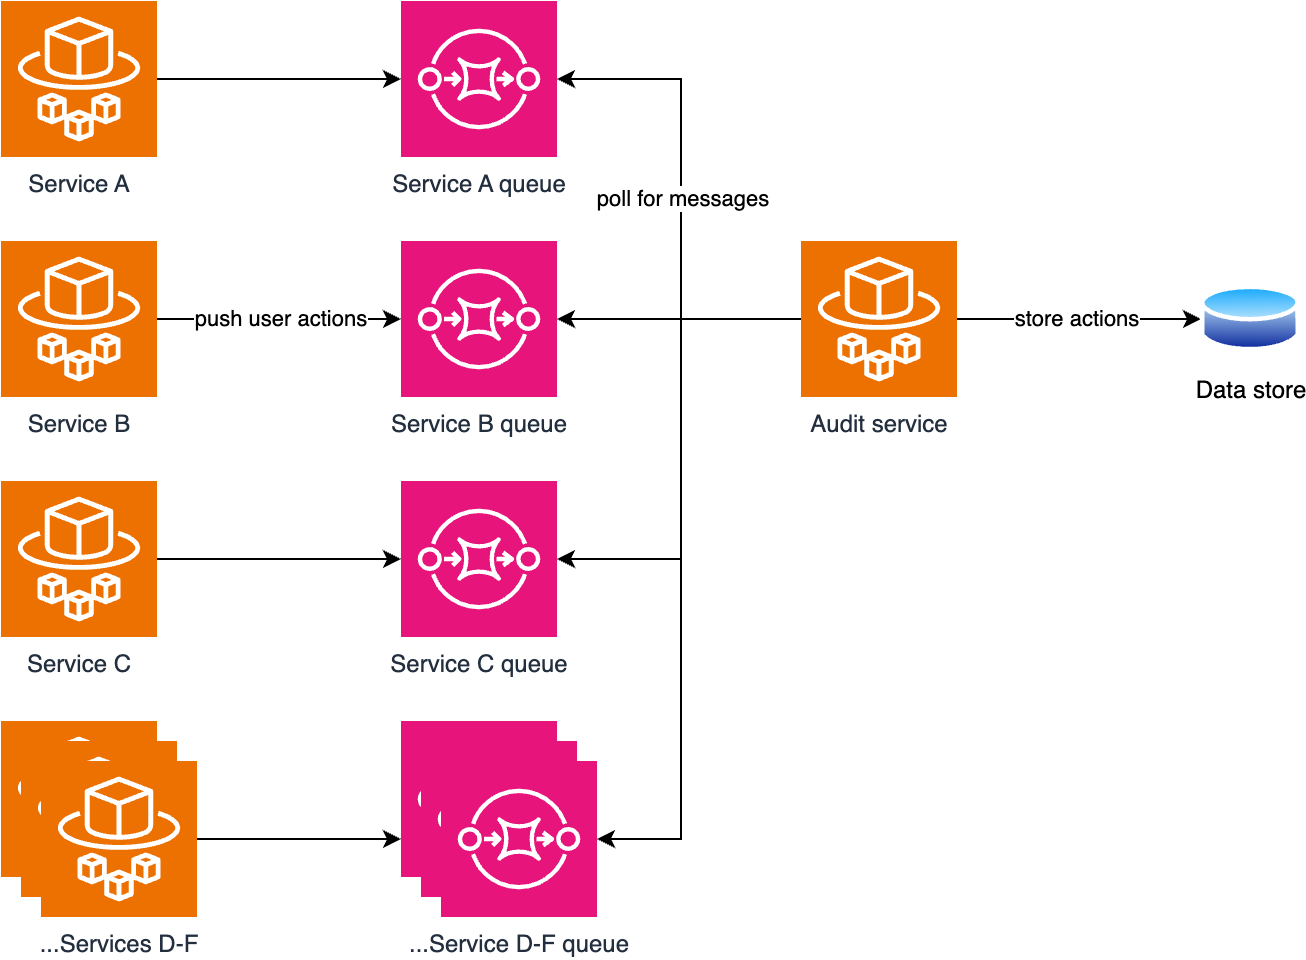 Services A-F running in AWS ECS Fargate push user actions to their own SQS queues. The audit service polls each SQS queue for messages and stores them in a data store.